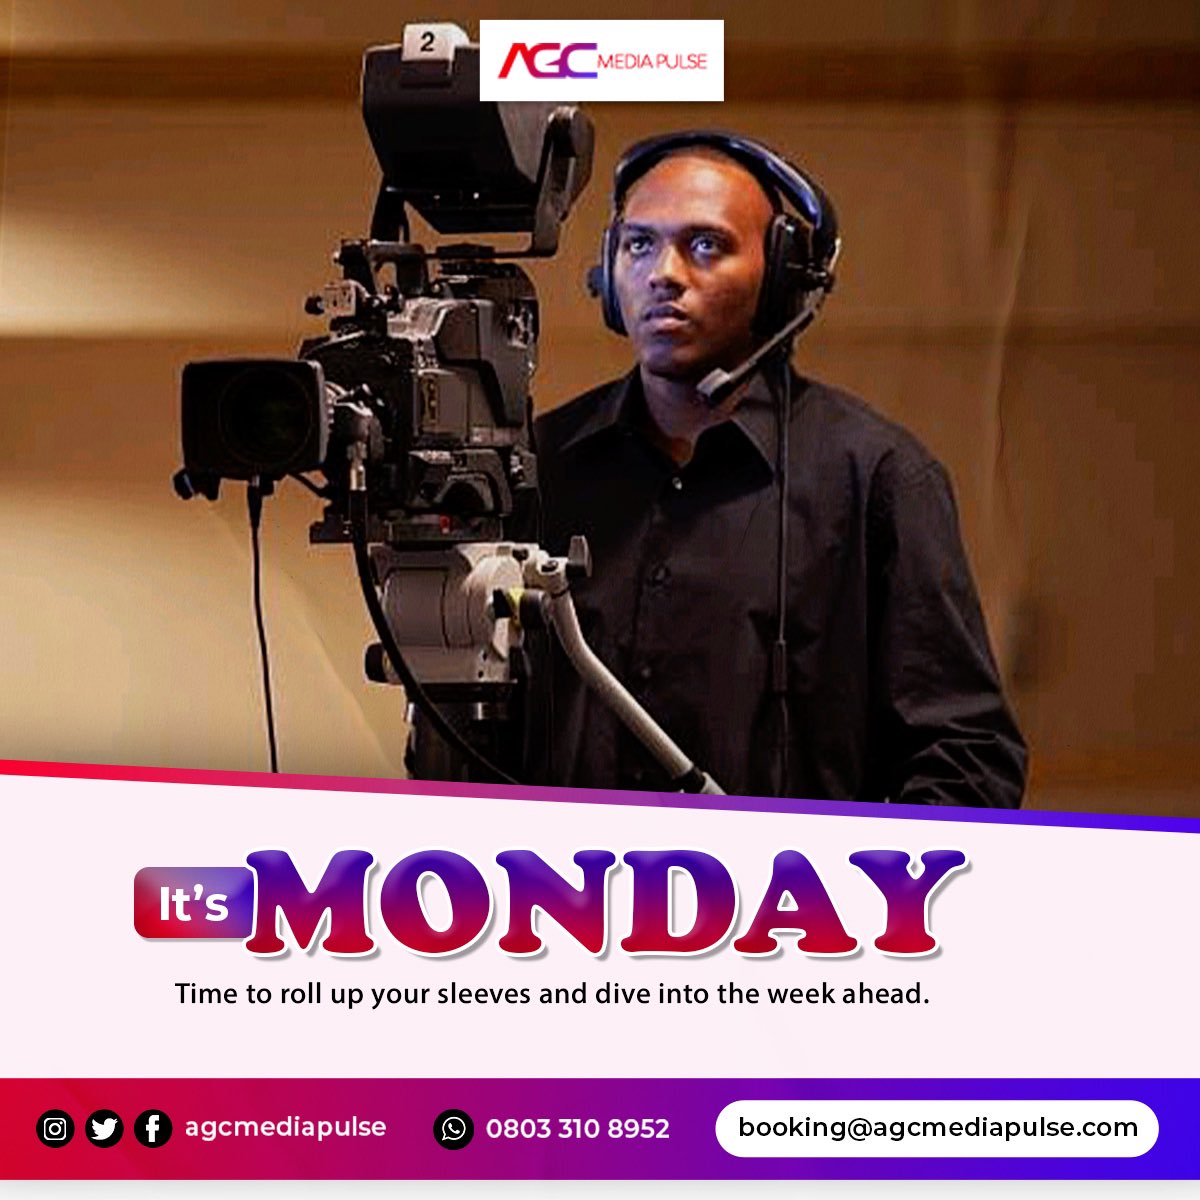 Let's start strong, stay focused, and make this week one to remember. You've got this!

#agc #agcmedia #agcmediapulse #media #mediaproduction #mediaagency #mondaymotivation #monday #explore #viral